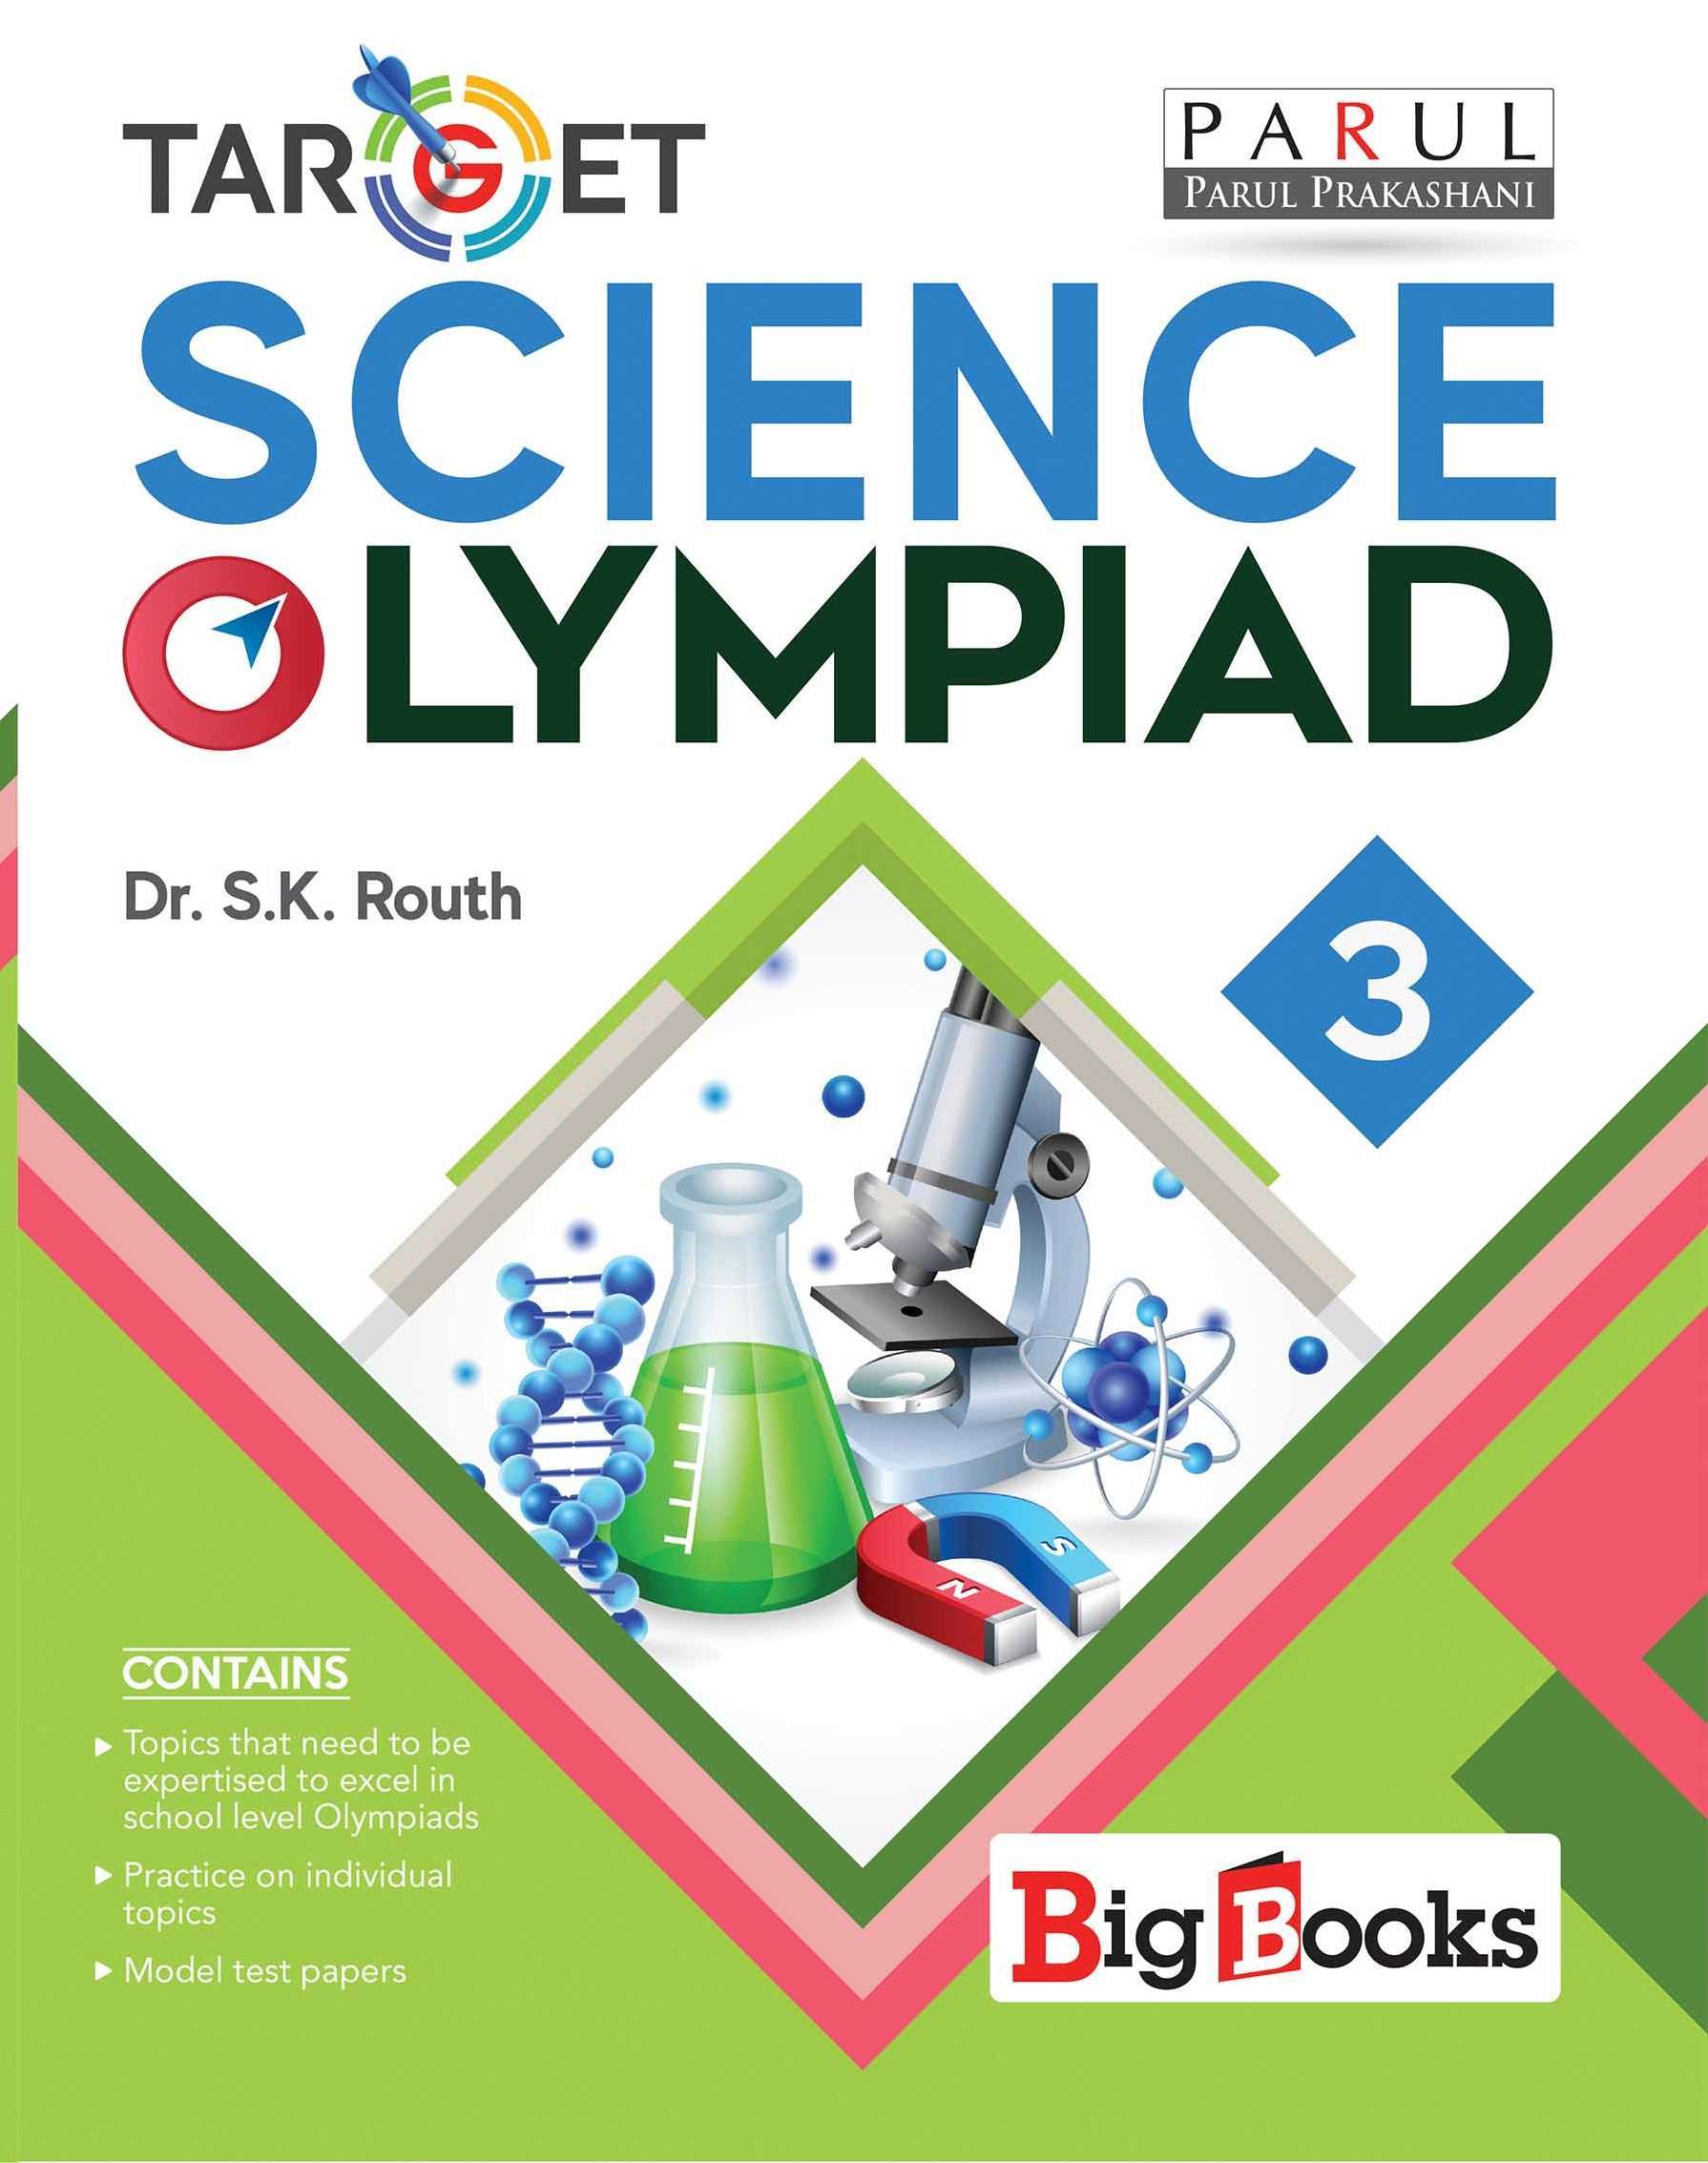 Buy Science Olympiad book for 3